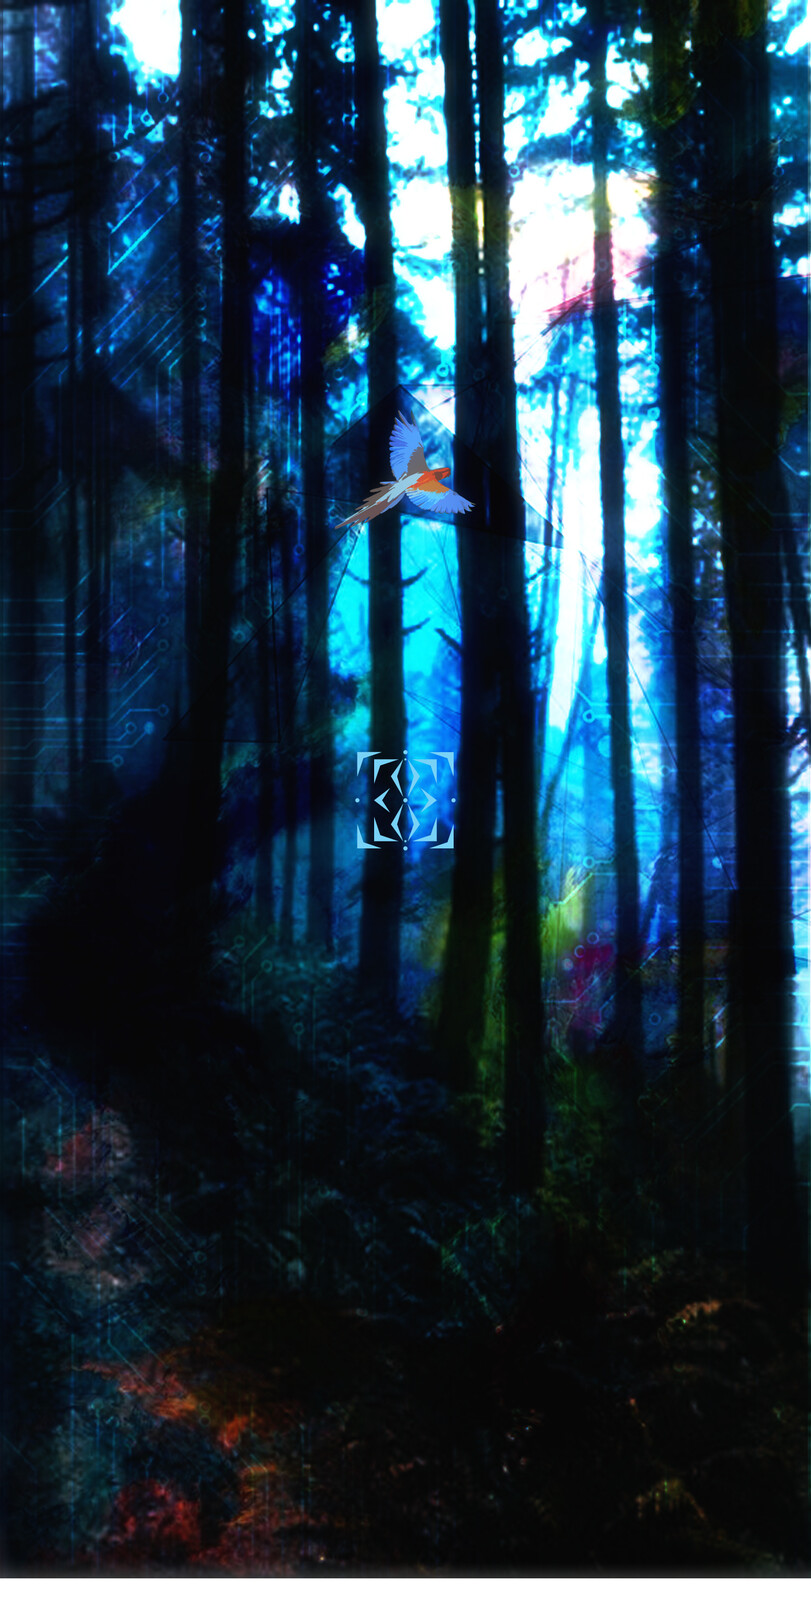 Forests_04